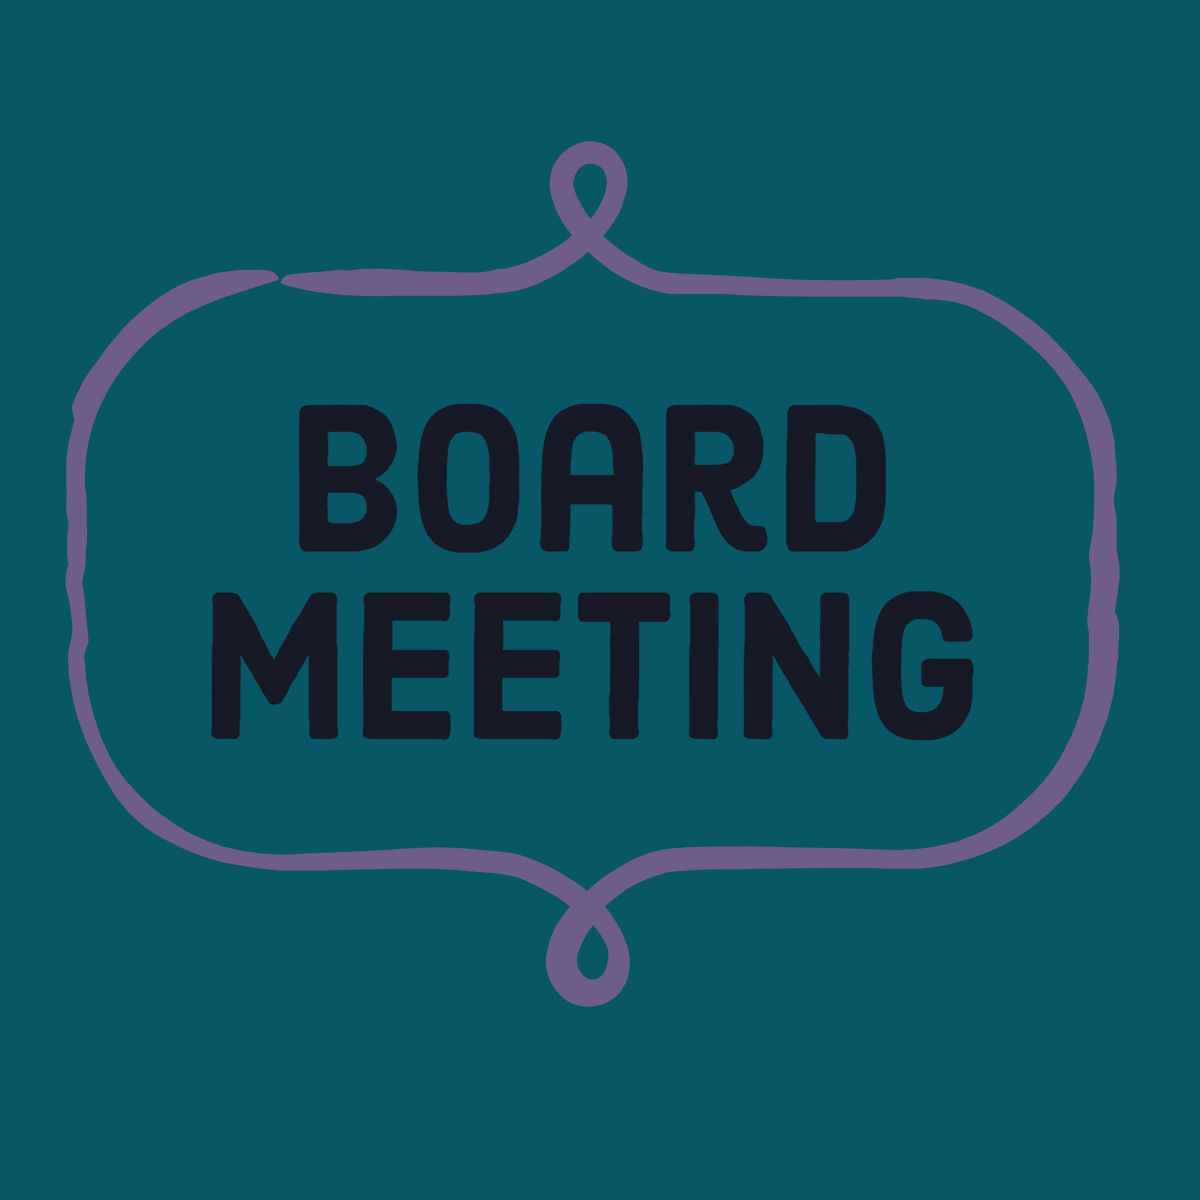 Board meeting graphic